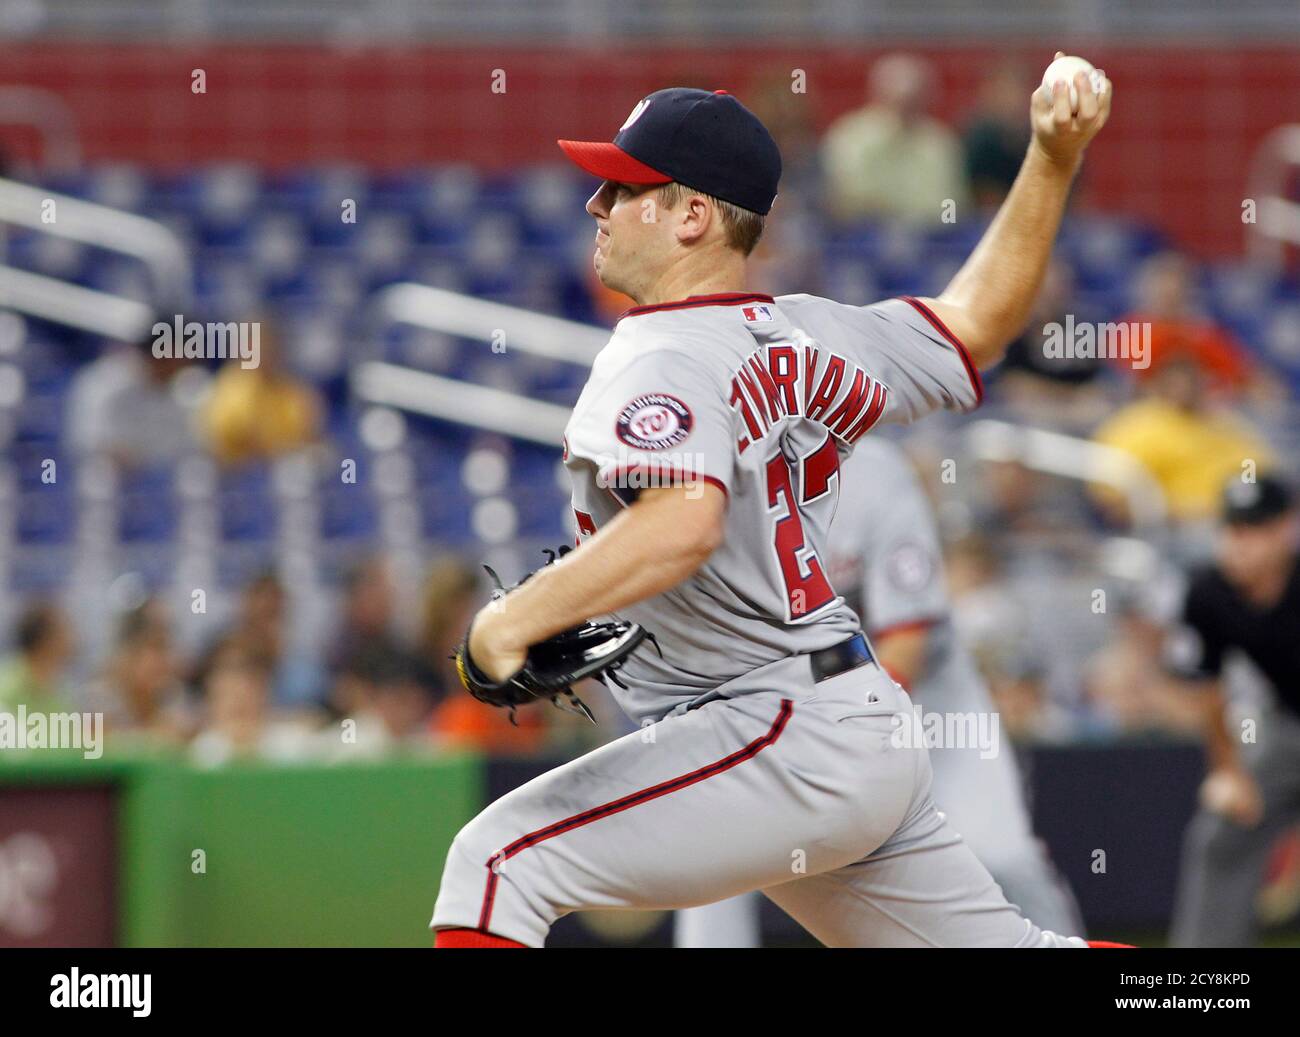 Washington Nationals starting pitcher Jordan Zimmermann throws against the Miami Marlins in the first inning during their MLB National League baseball game in Miami, Florida July 13, 2012.    REUTERS/Joe Skipper  (UNITED STATES - Tags: SPORT BASEBALL) Stock Photo